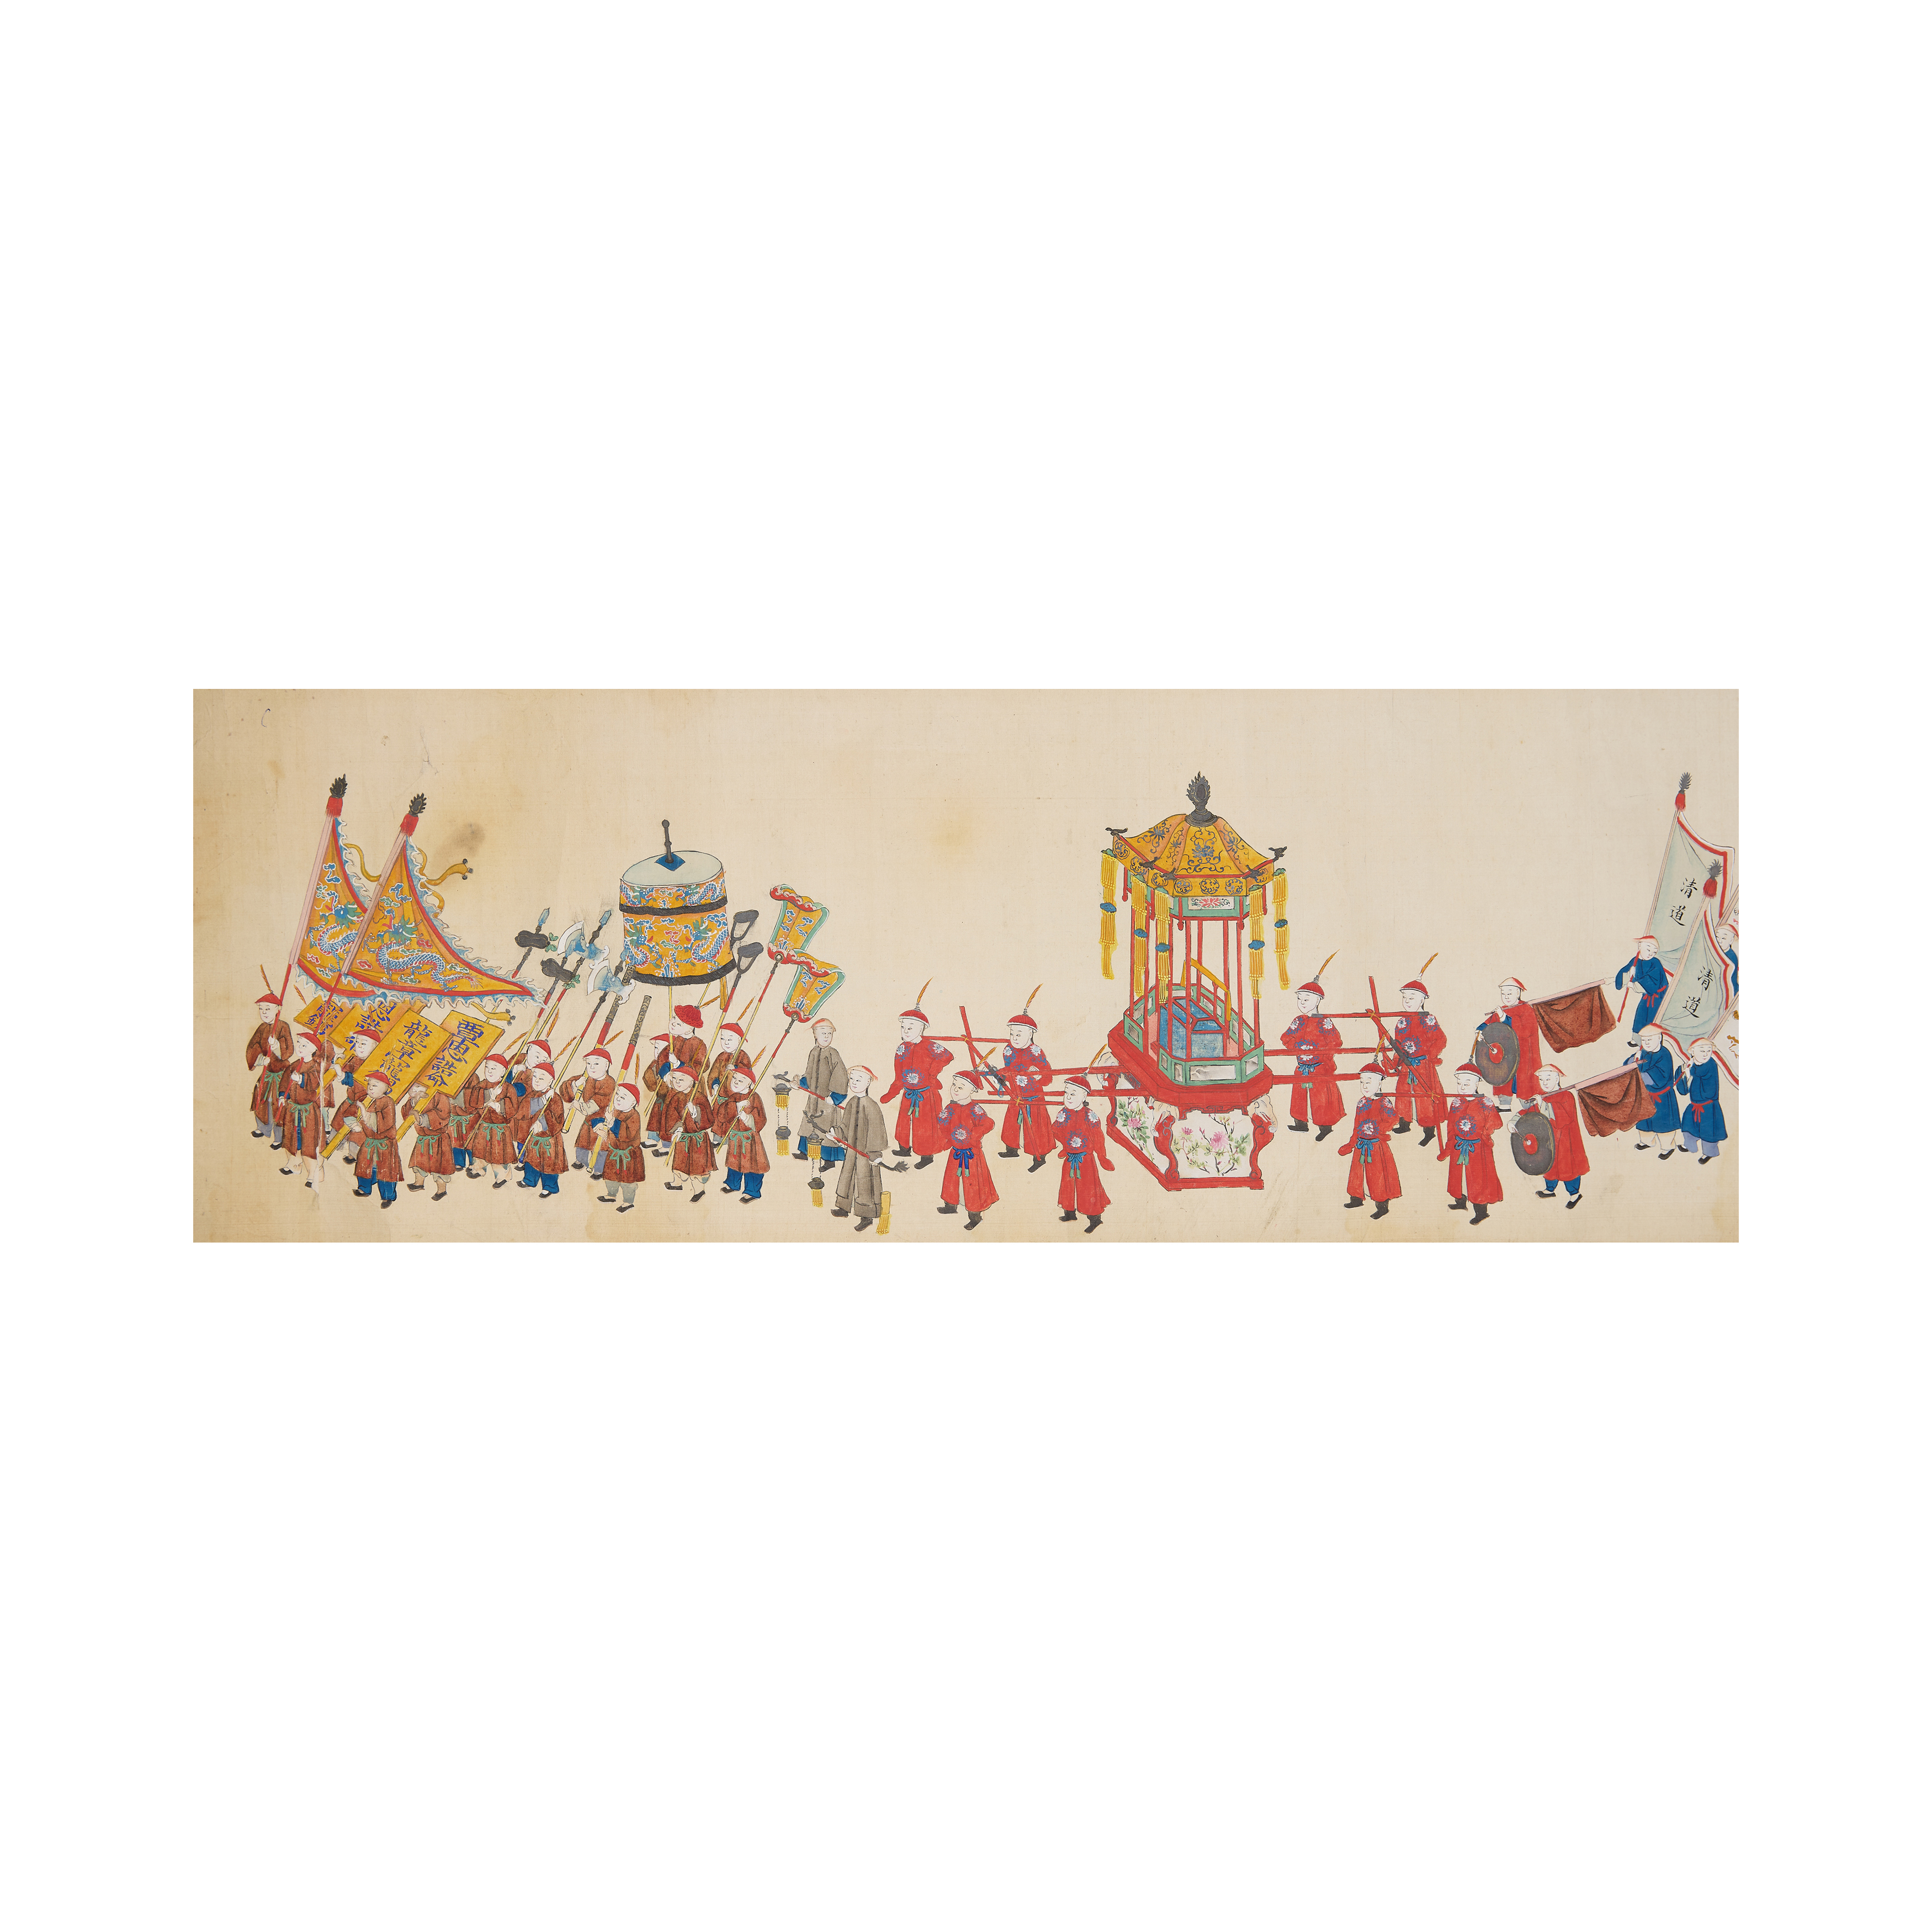 After Xue Ji (649 - 713) 'Procession' Ink and colour on silk, mounted as handscroll, 321cm x 25... - Image 2 of 8